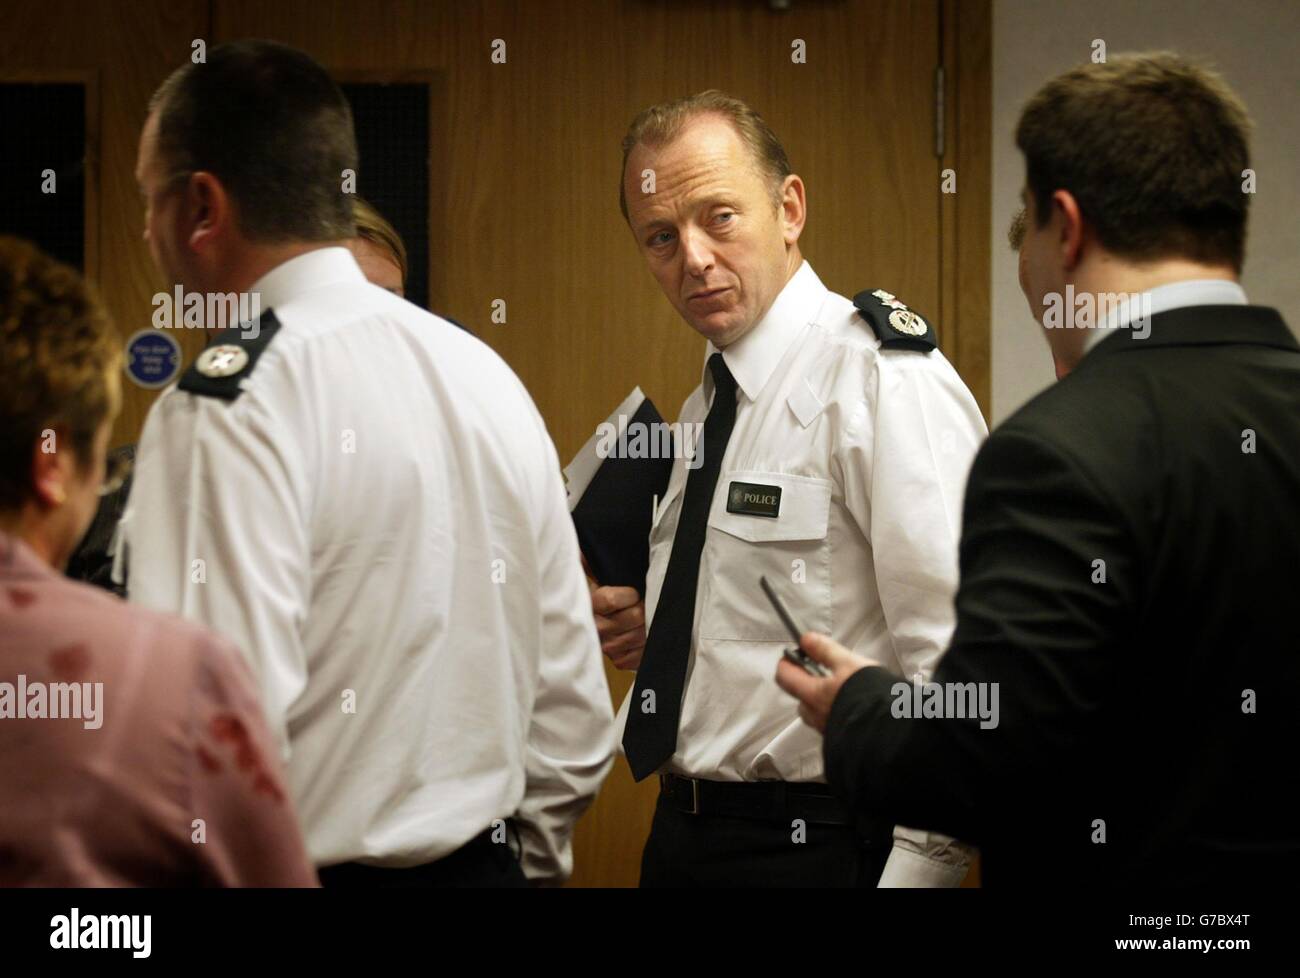 Police Service of Northern Ireland (PSNI), Chief Constable Hugh Orde, speaking at a press conference in Belfast, where he announced that he is retaining 680 of the full-time reserve officers in Northern Ireland who were threatened with the axe. Even though he has decided to make more than half of the officers redundant, Mr Orde insisted it was too soon to get rid of all the men and women whose futures were under threat. However Union representatives of rank and file police passed a vote of no confidence in Northern Ireland Chief Constable Hugh Orde over his decision to reduce his full-time Stock Photo